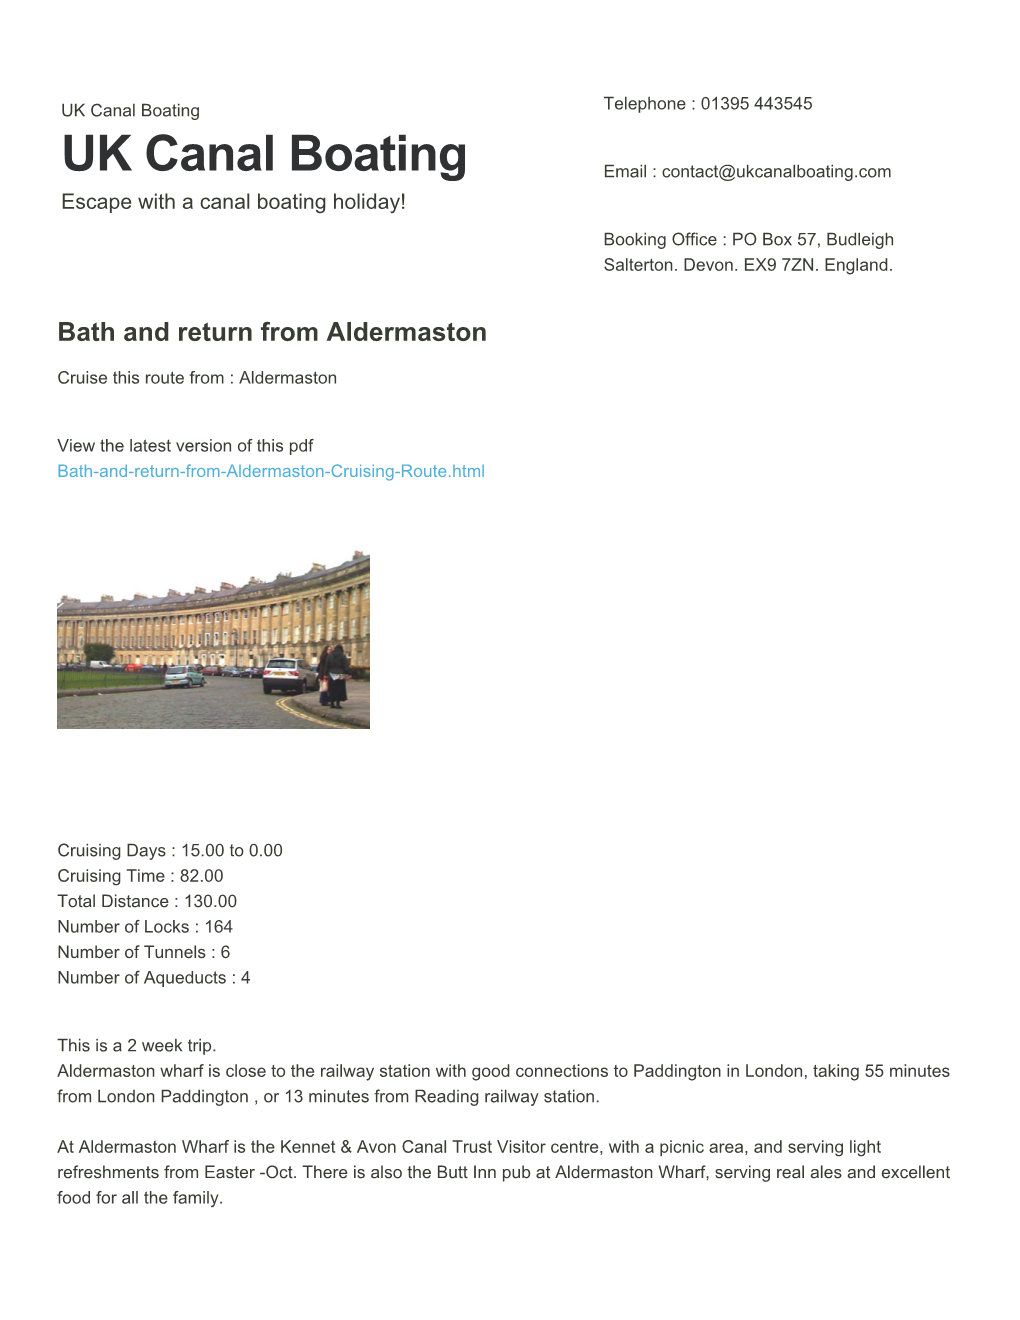 Bath and Return from Aldermaston | UK Canal Boating